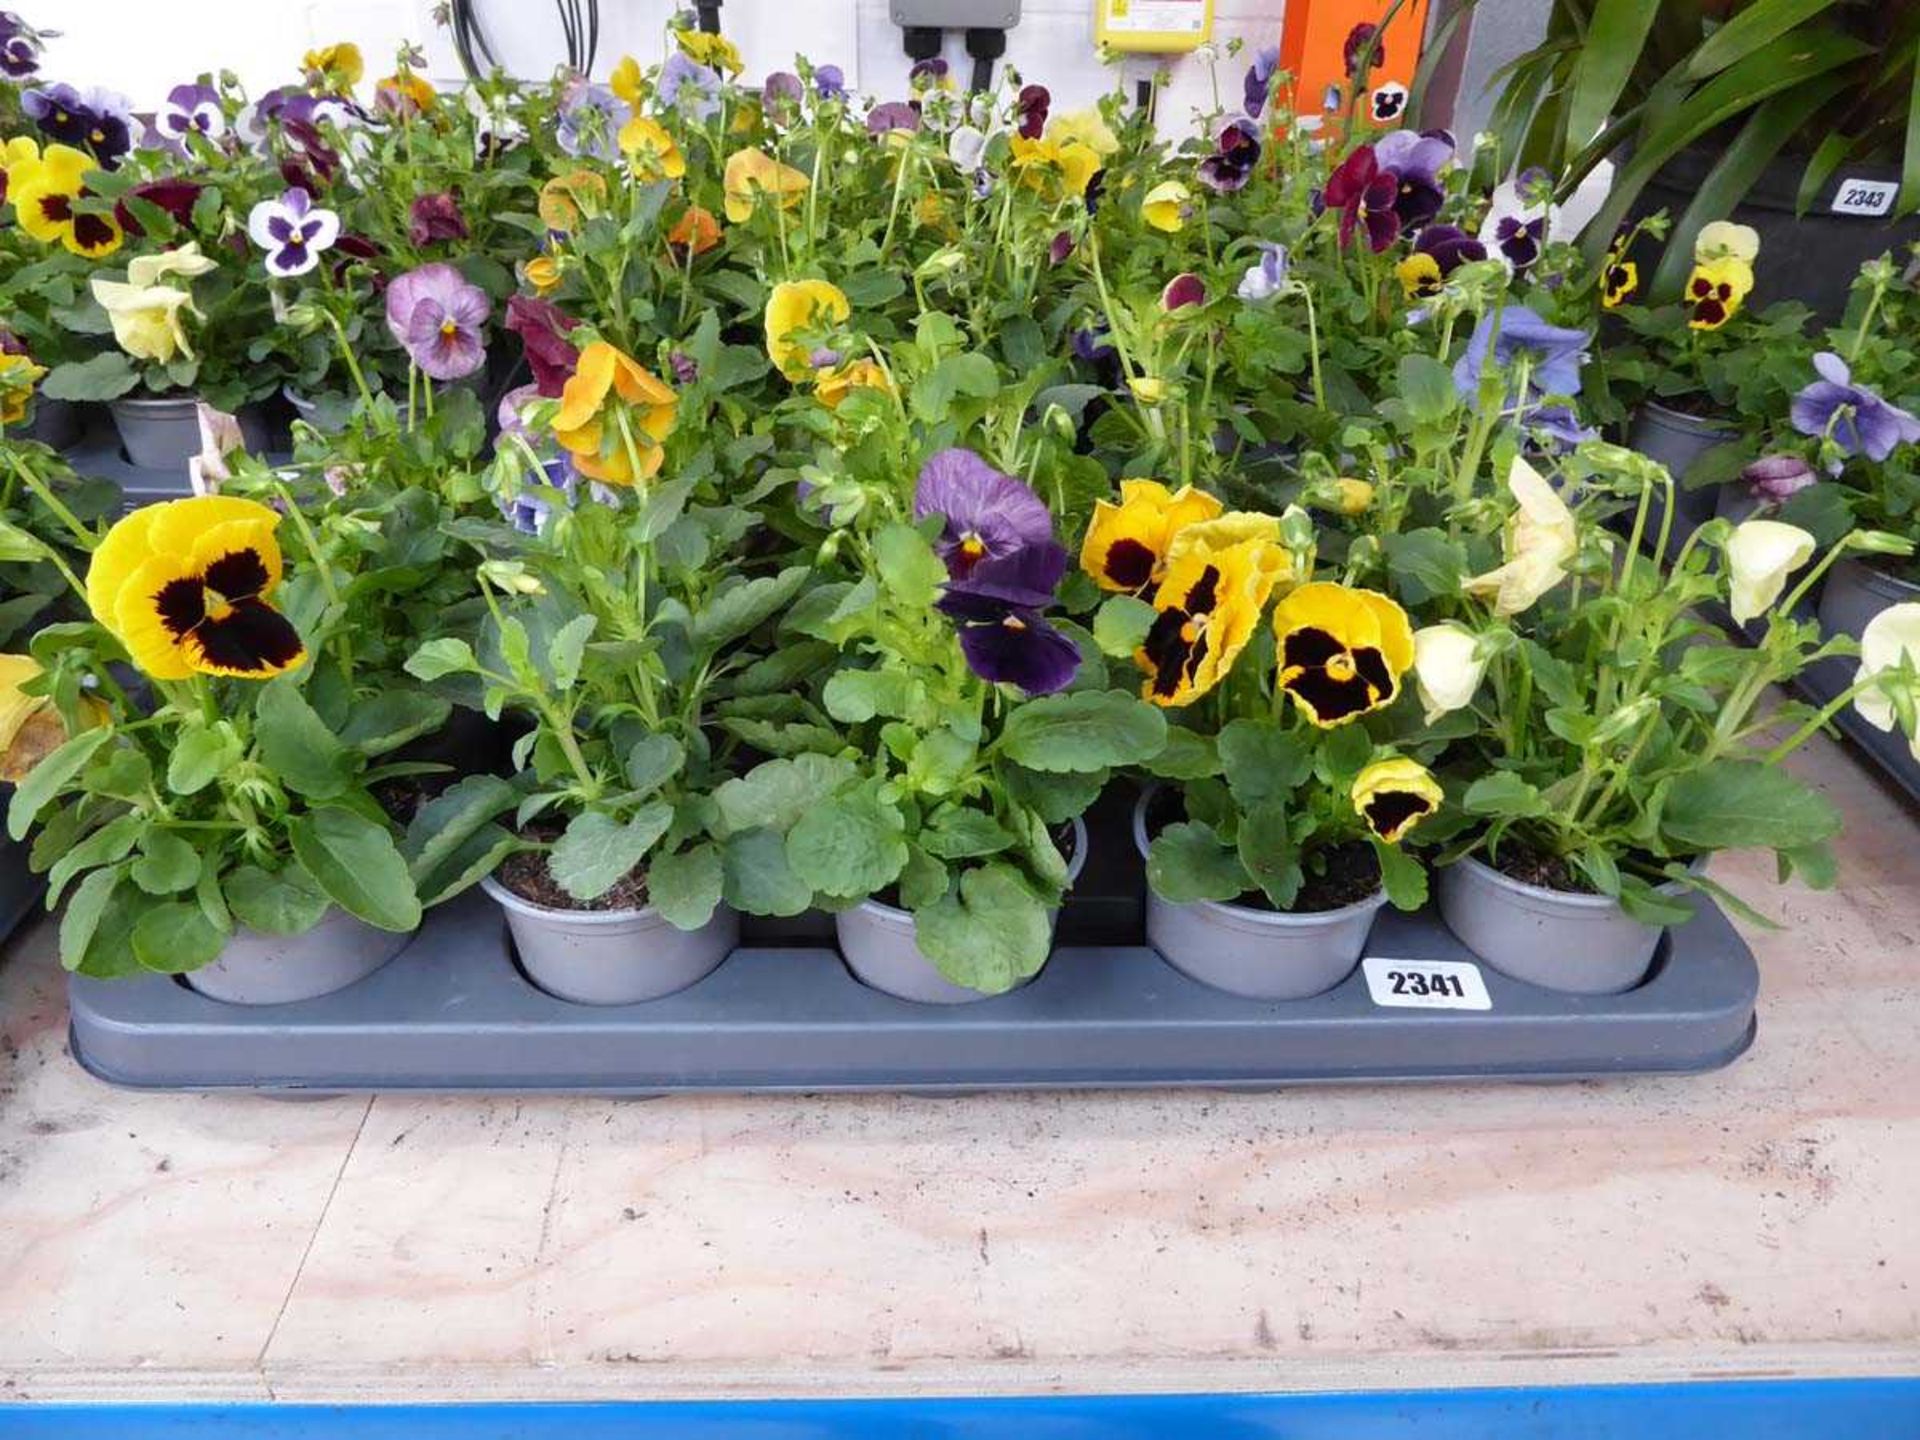 Tray containing 15 pots of mixed pansies